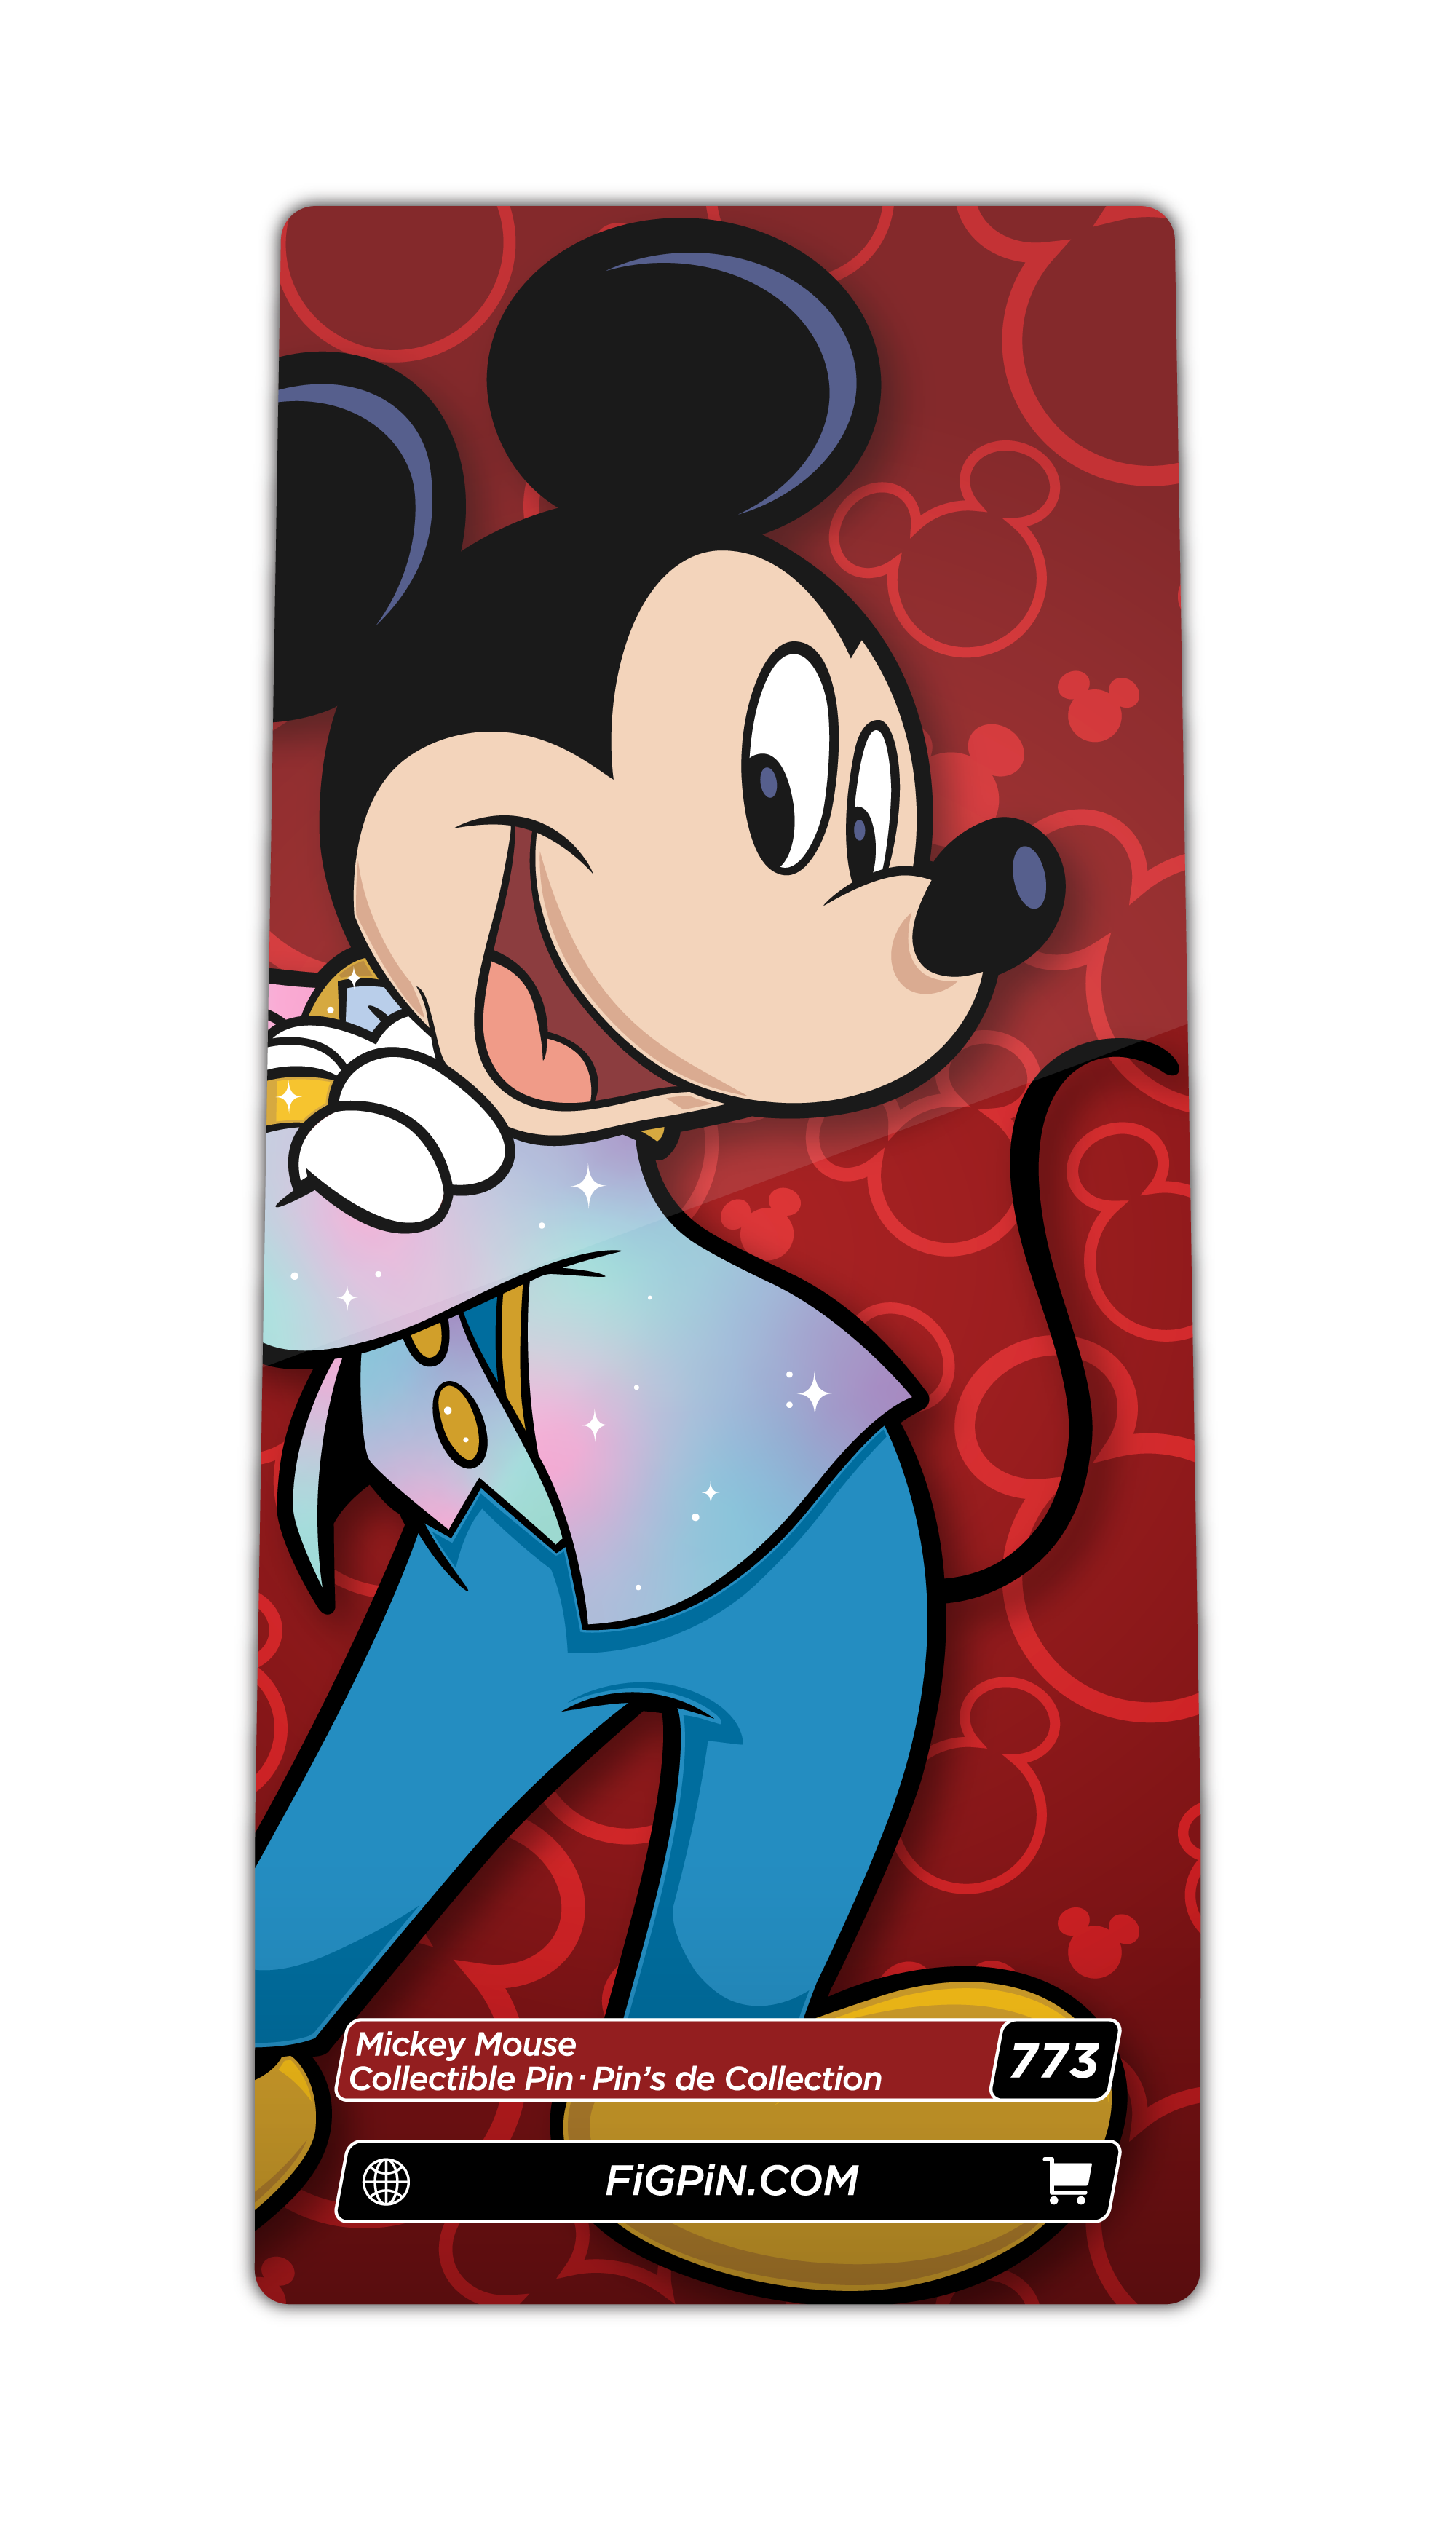 Mickey Mouse (773)